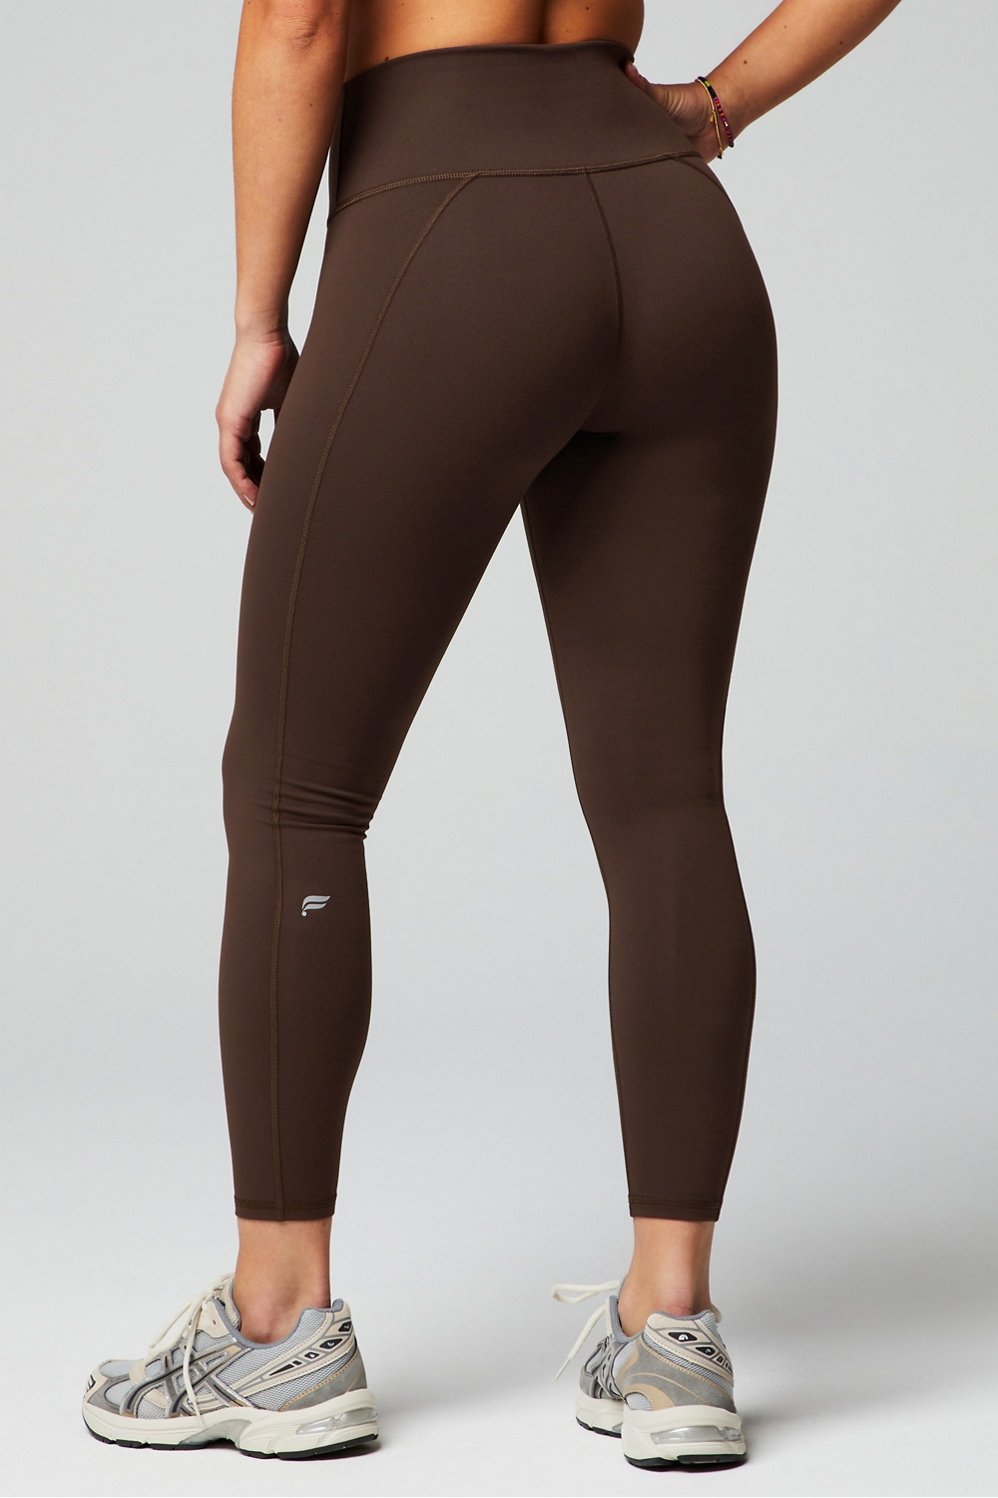 Fabletics Define PowerHold® High-Waisted 7/8 Legging Size Small: S/Meltdown